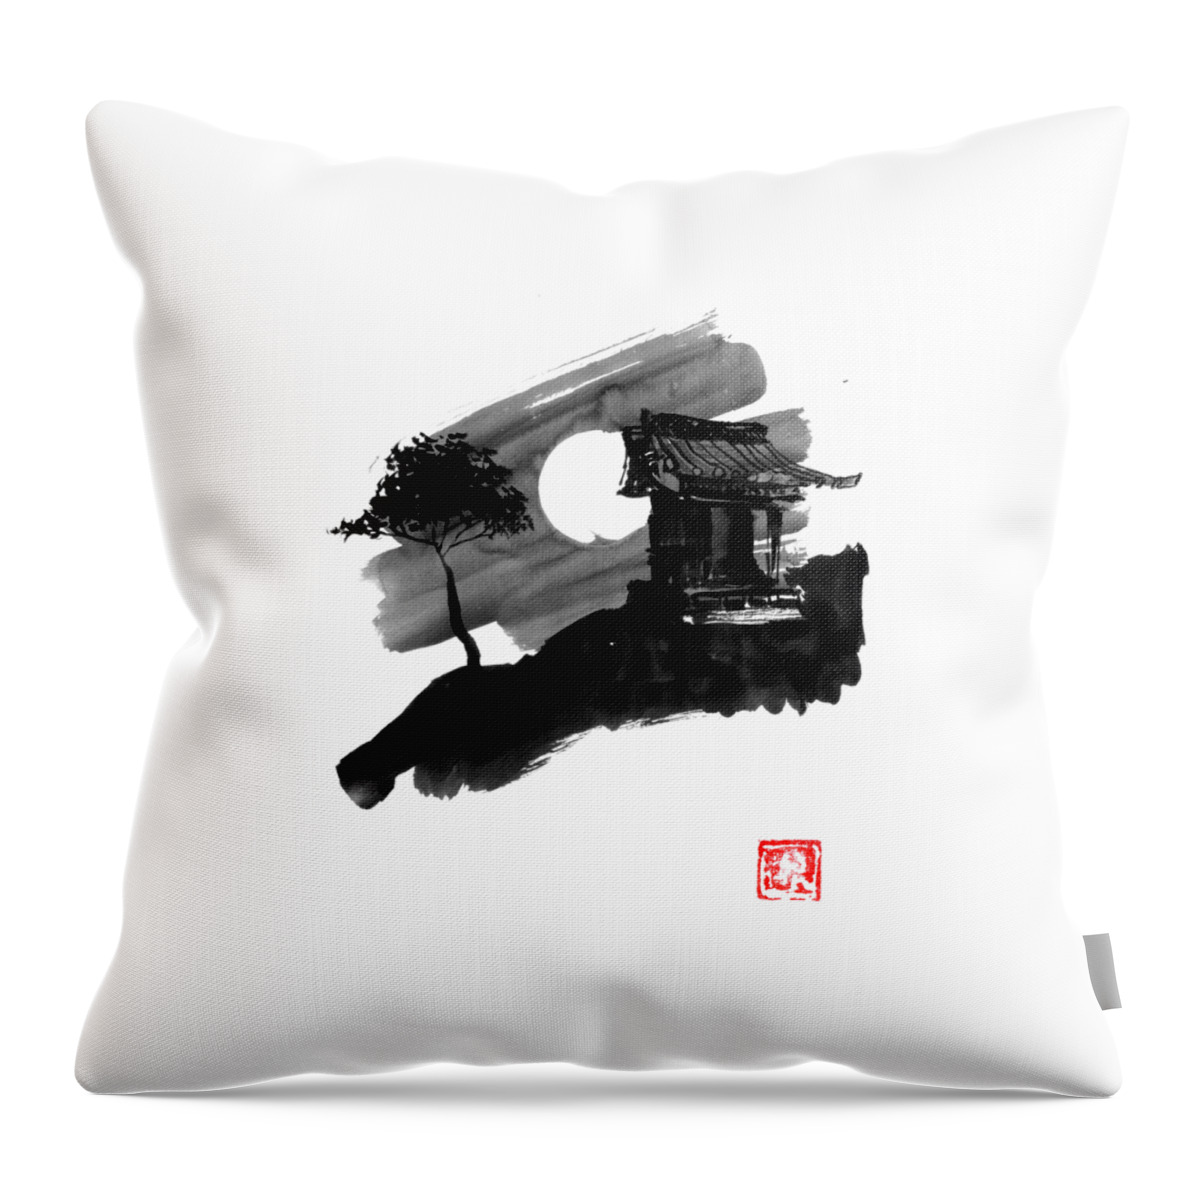 Shrine Throw Pillow featuring the drawing Shrine by Pechane Sumie